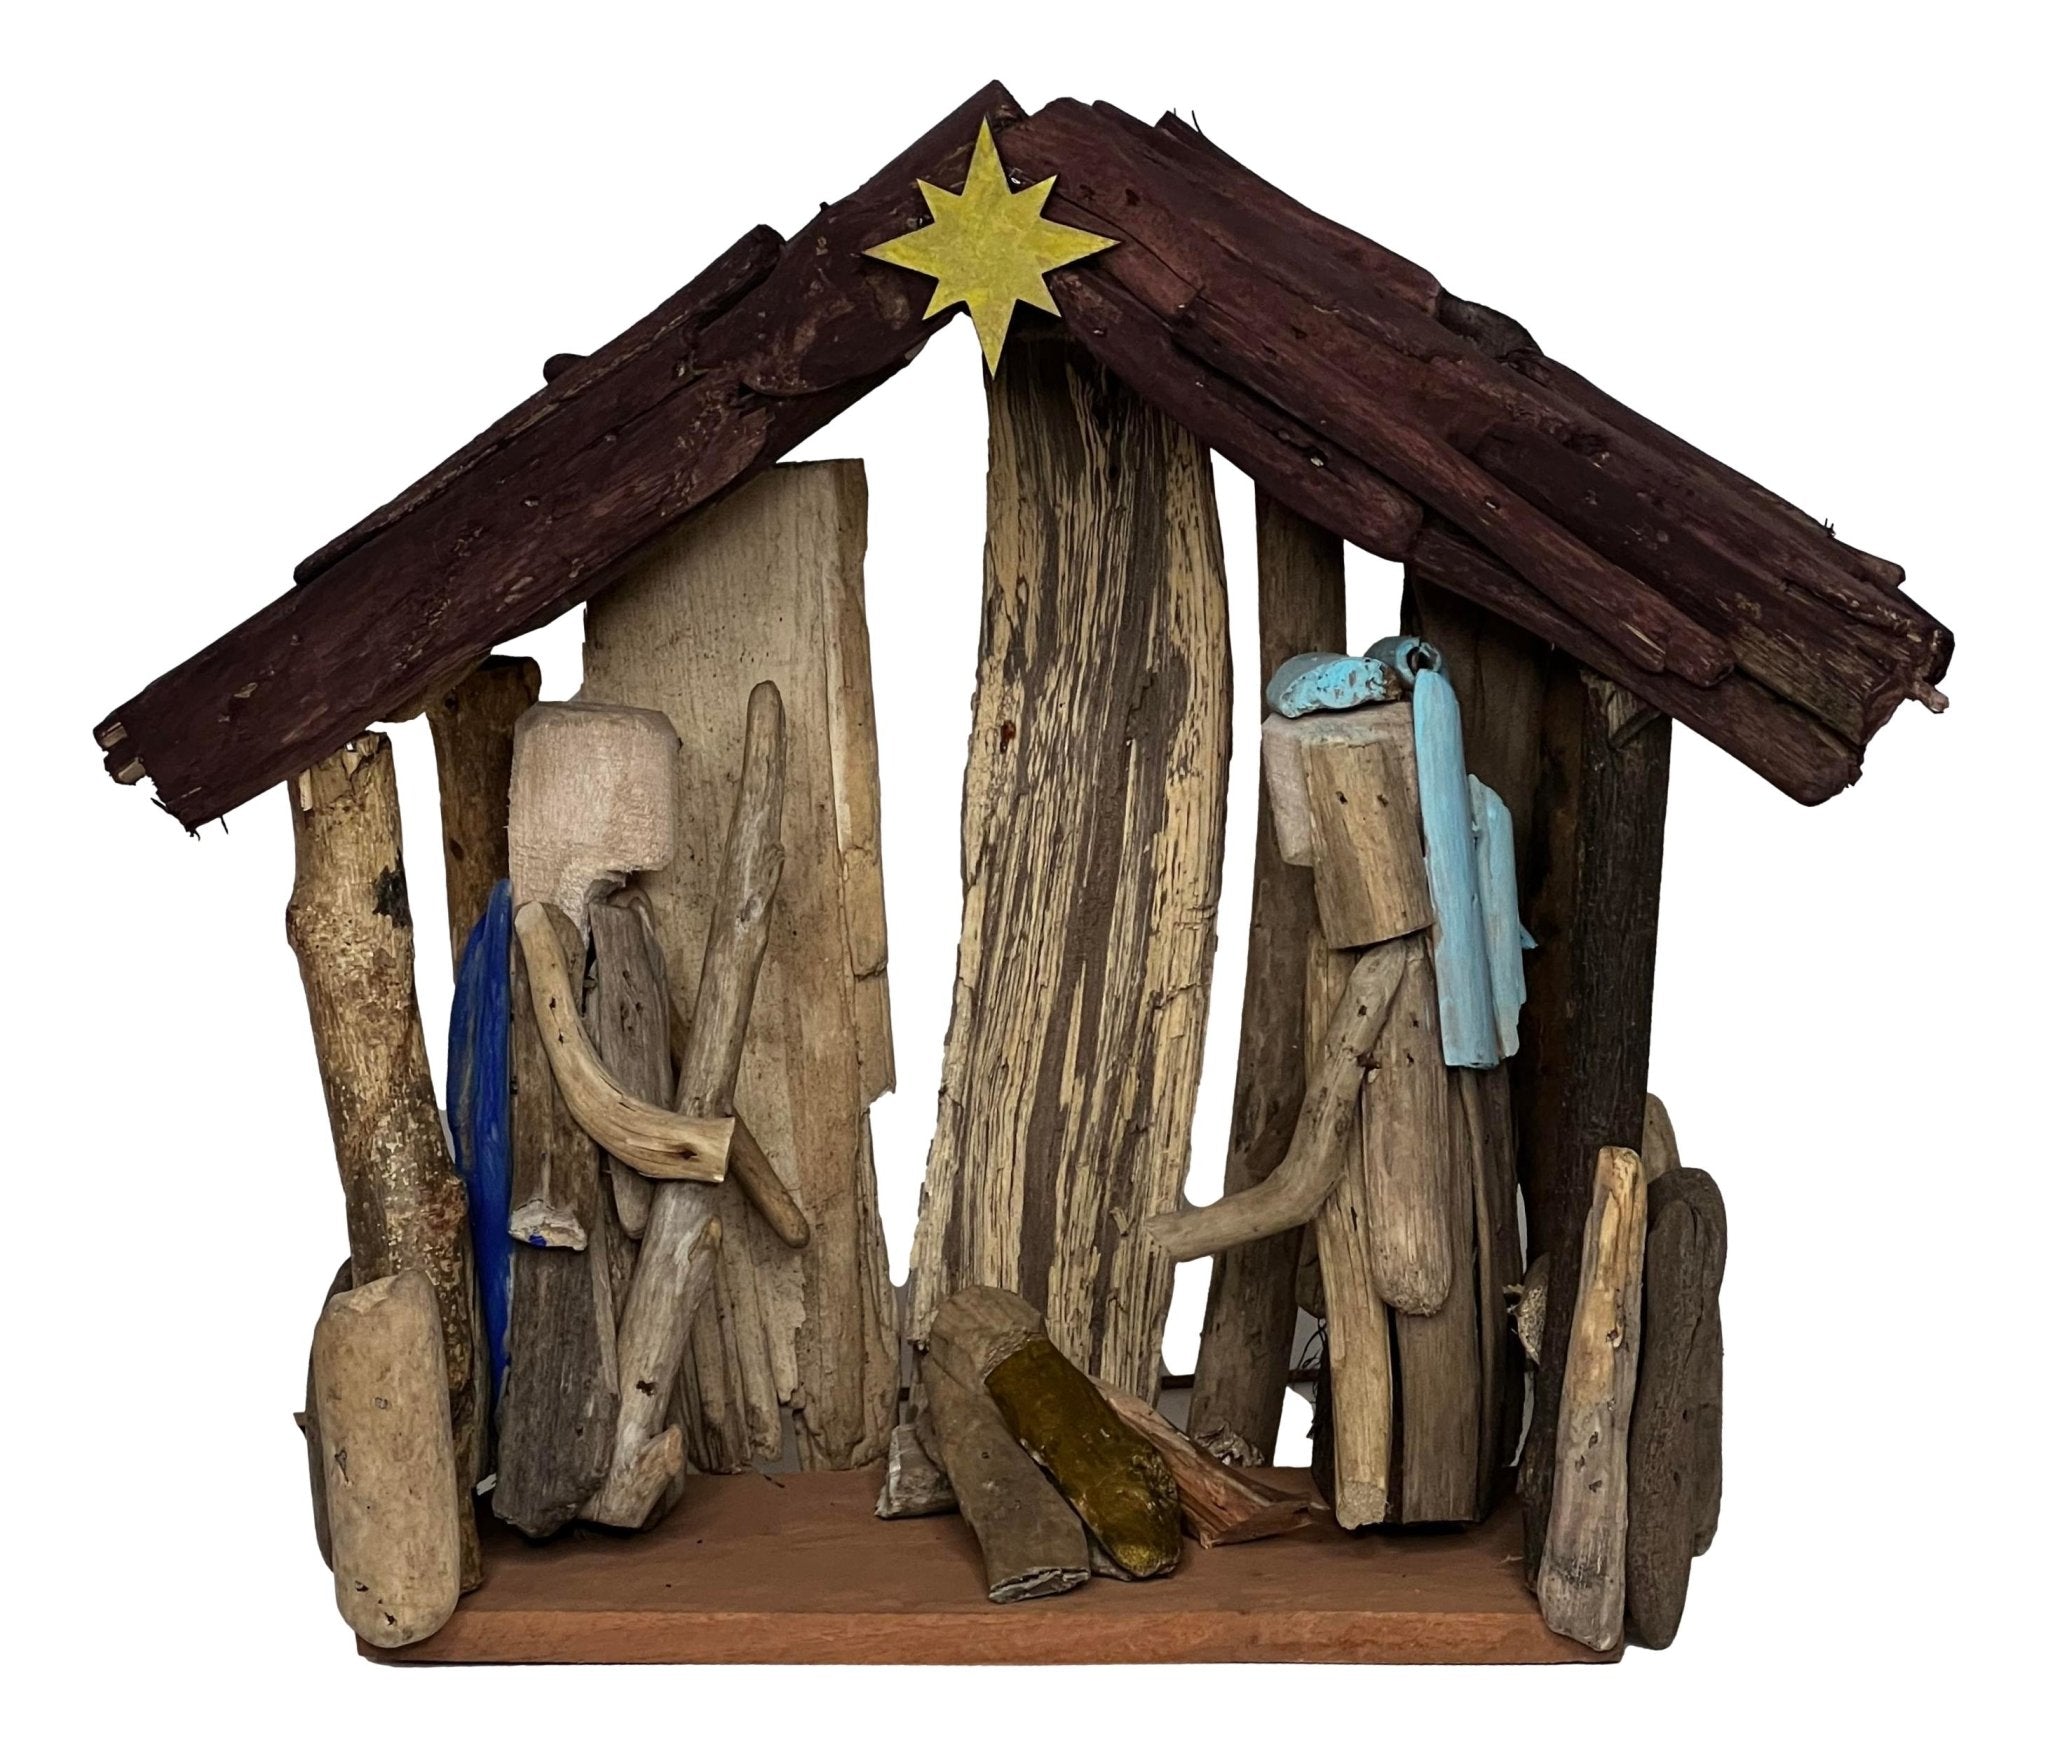 Nativity Wood Carved Drift Wood Handcrafted H:9 inches X W: 11 inches - Ysleta Mission Gift Shop- VOTED 2022 El Paso's Best Gift Shop